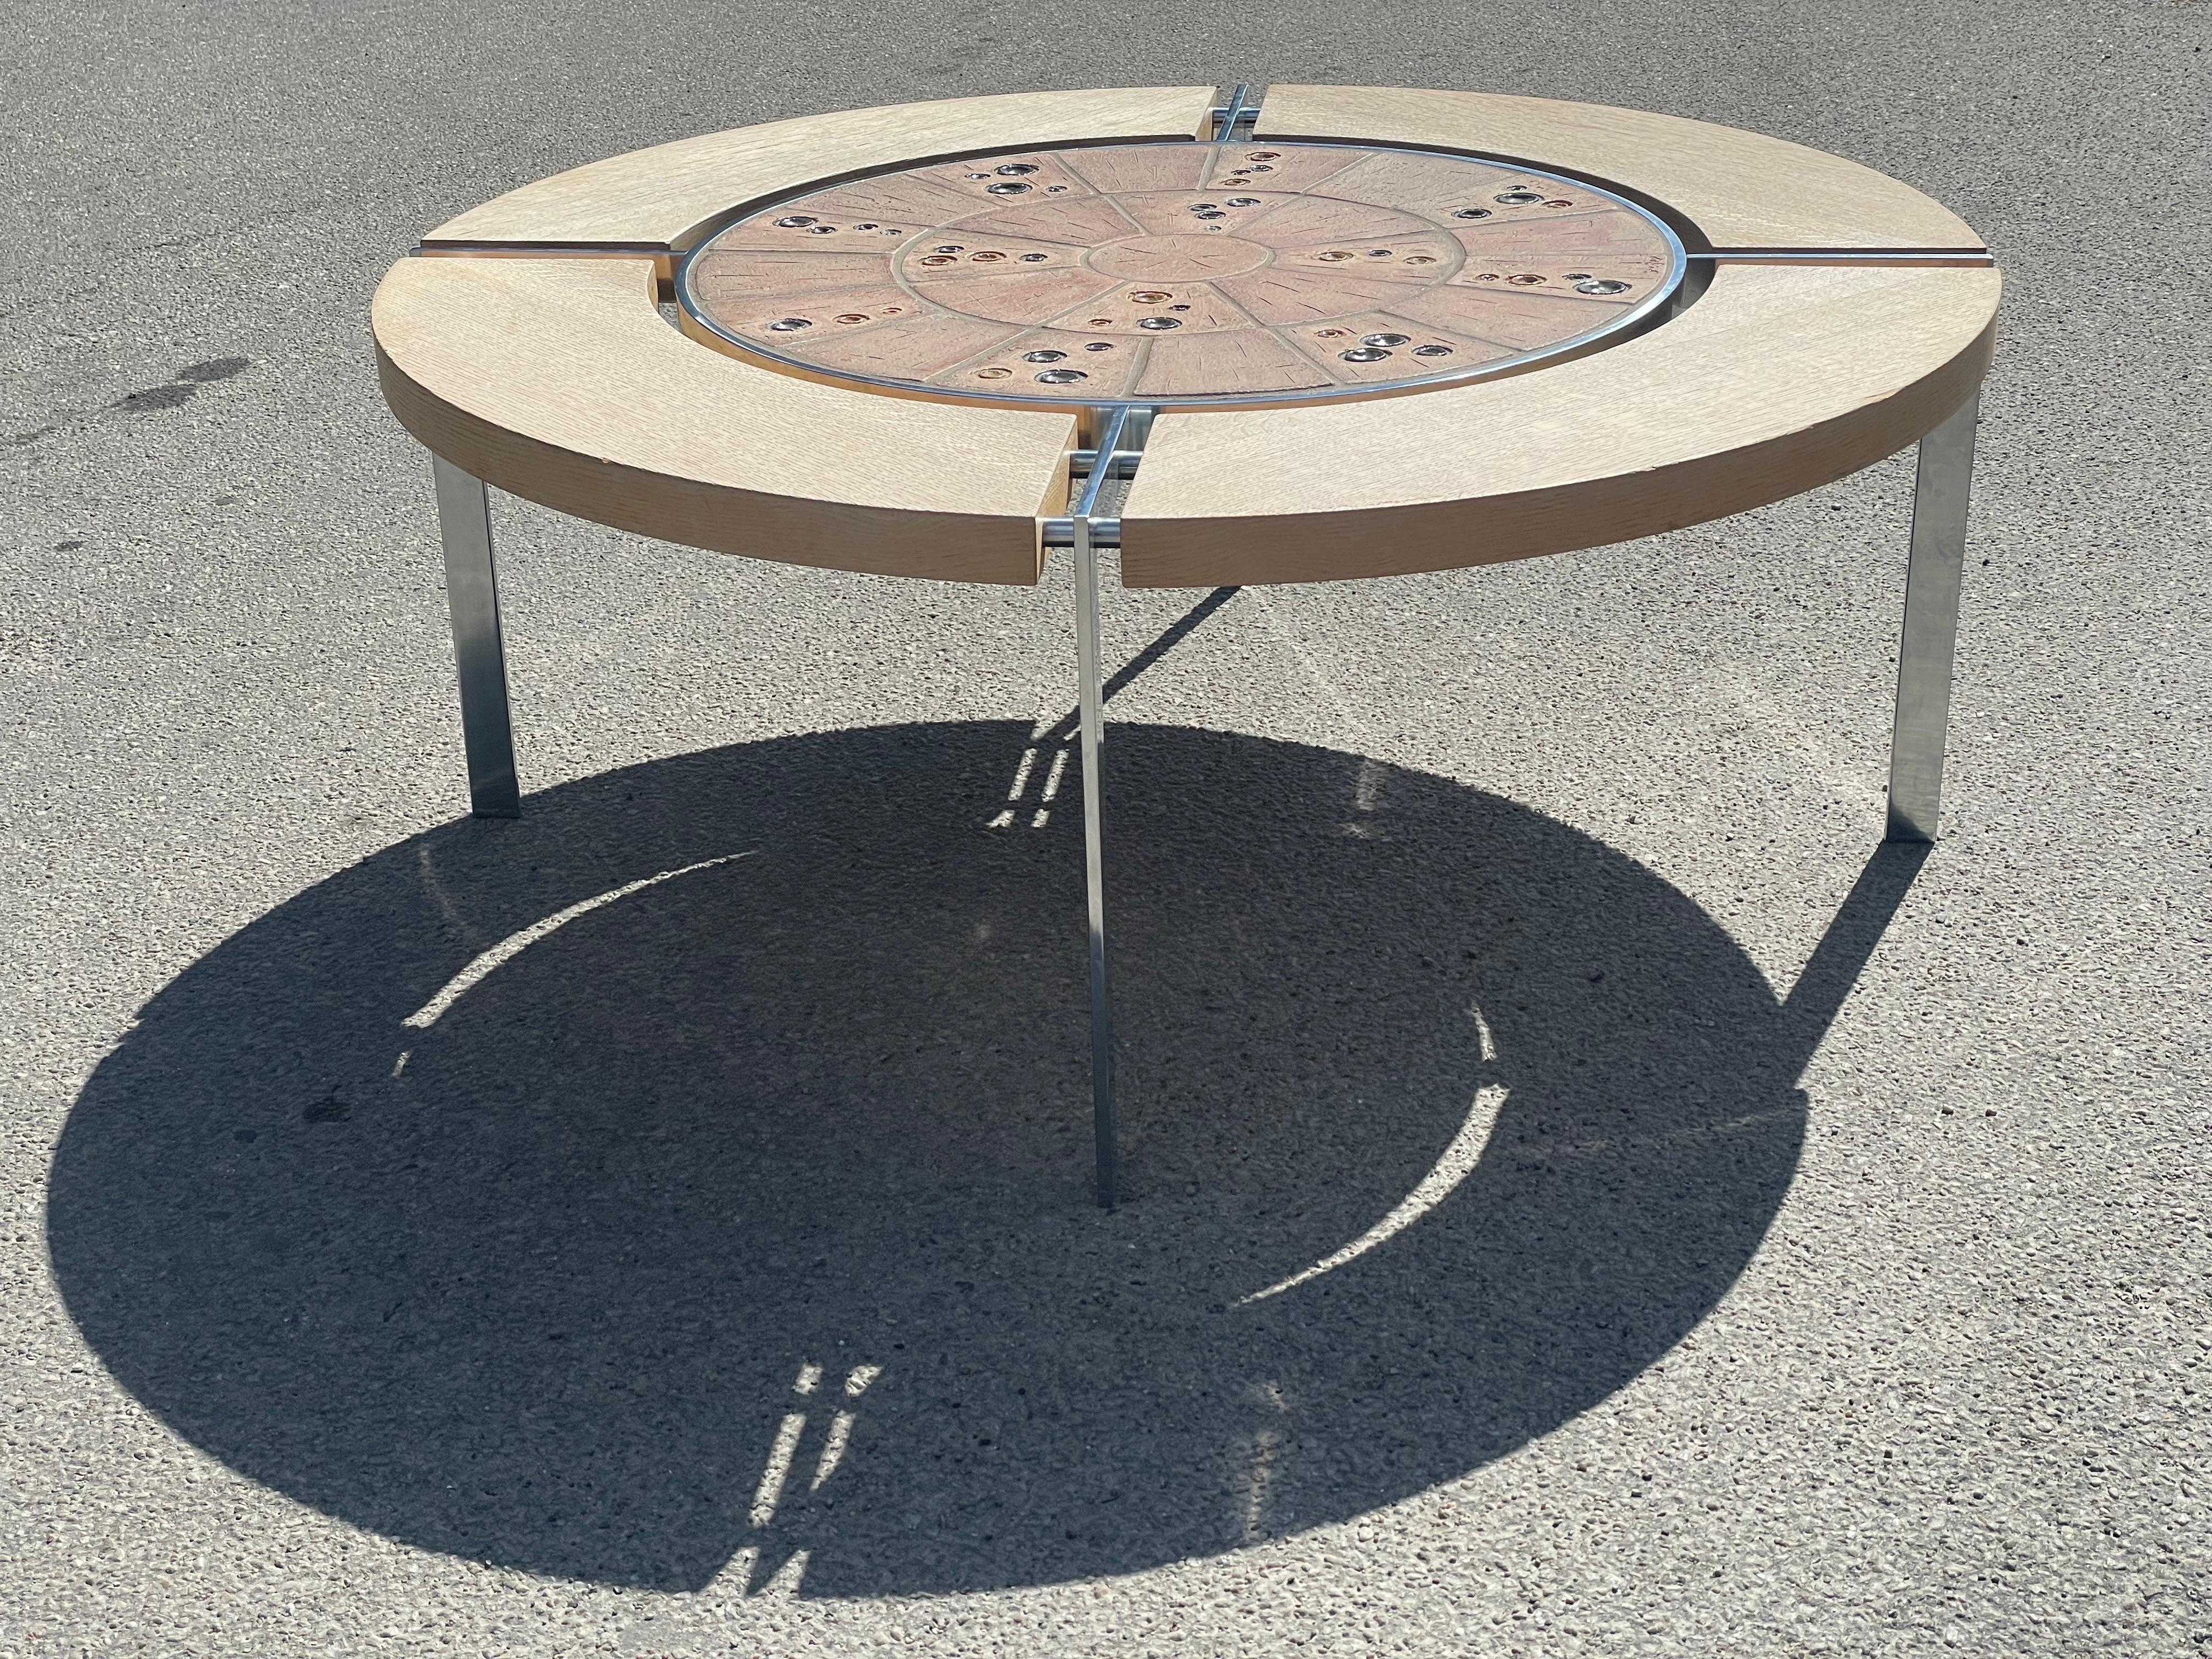 Rare Danish Mid-Century Modern Coffee Table by Svend Aage Jessen from 1970 For Sale 2